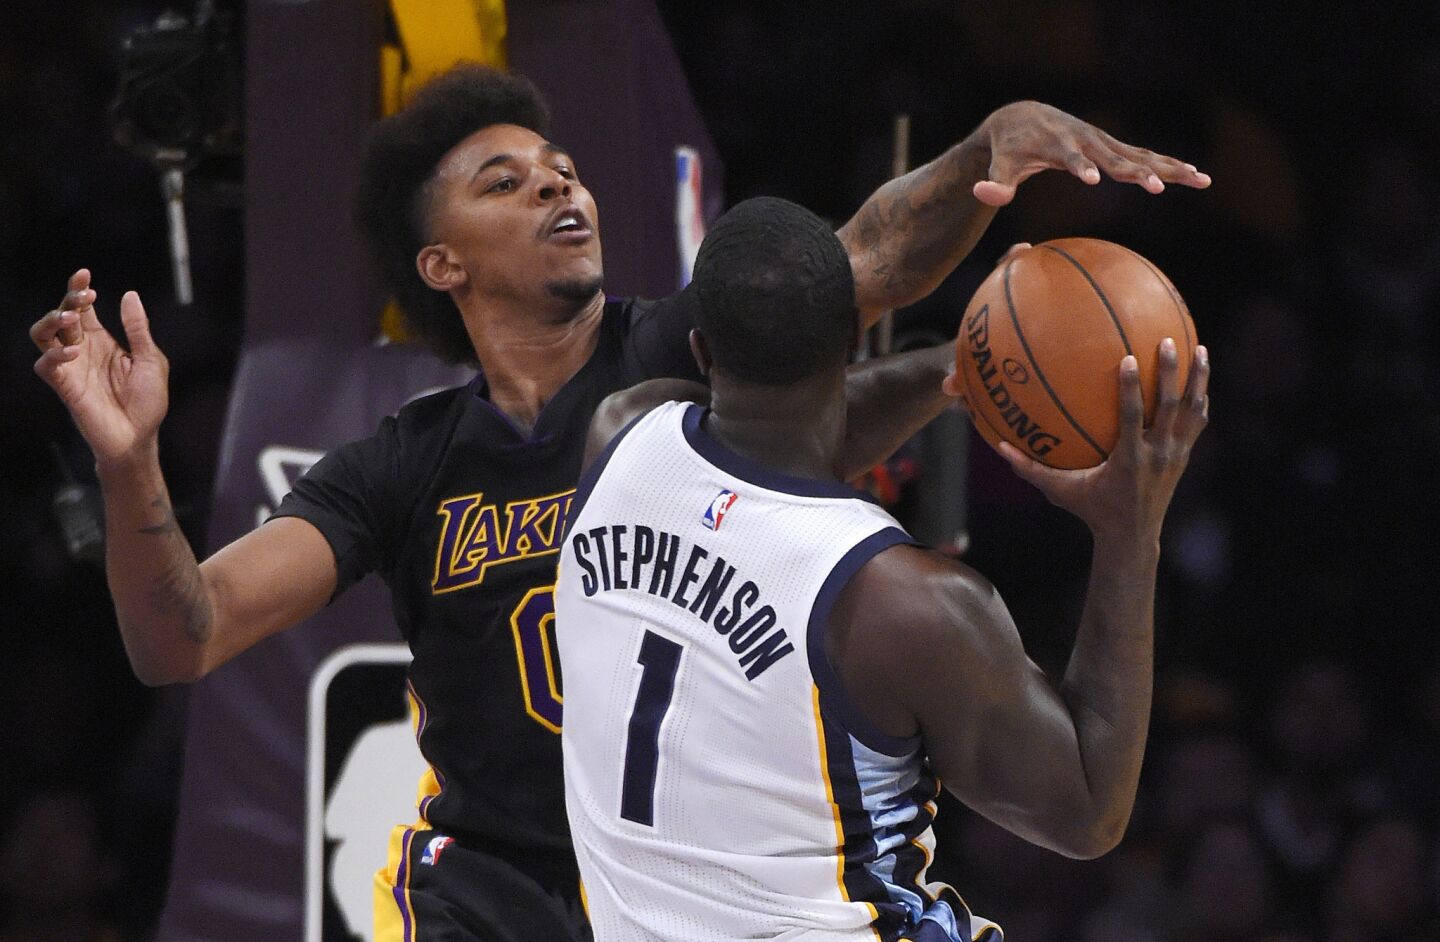 Lakers forward Nick Young, left, blocks a shot from Memphis forward Lance Stephenson during the first half of a game on Feb. 26 at Staples Center.